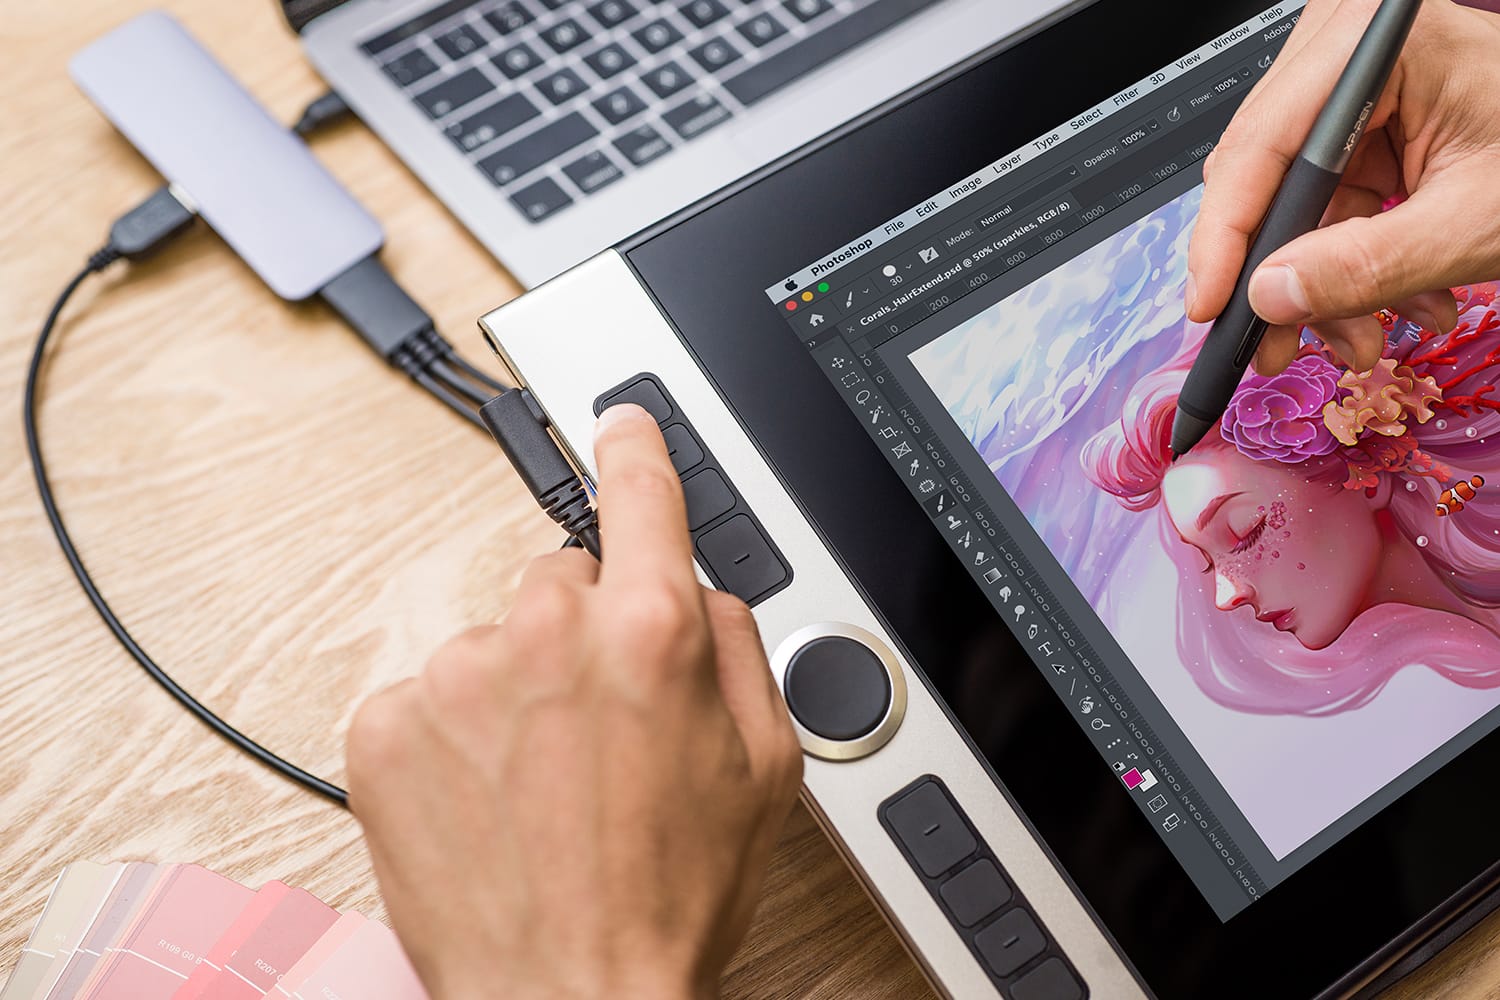 photo editing in photoshop with xp-pen innovator 16 screen drawing tablet